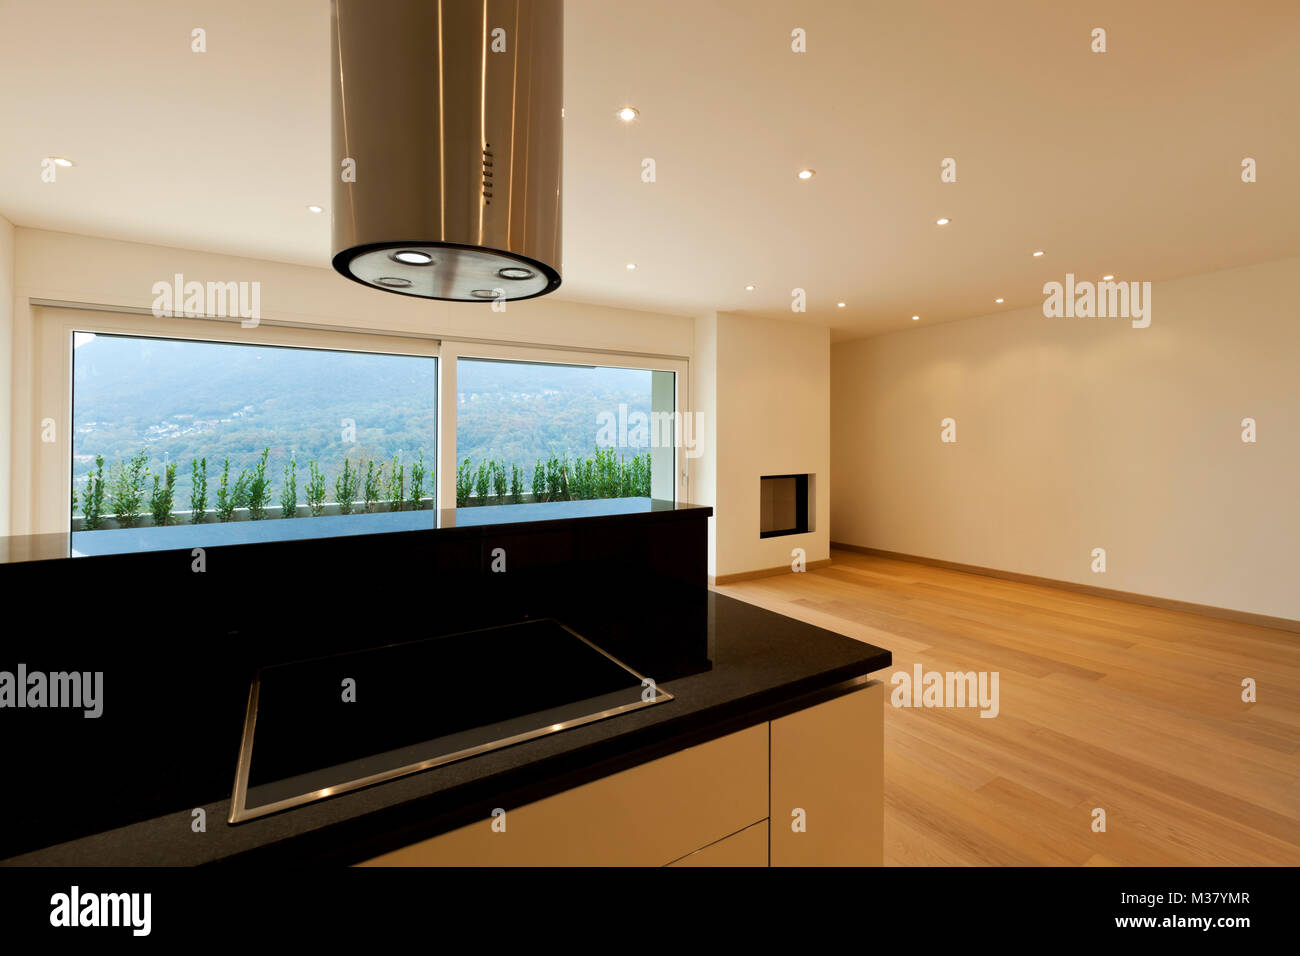 large room with kitchen island, window view Stock Photo